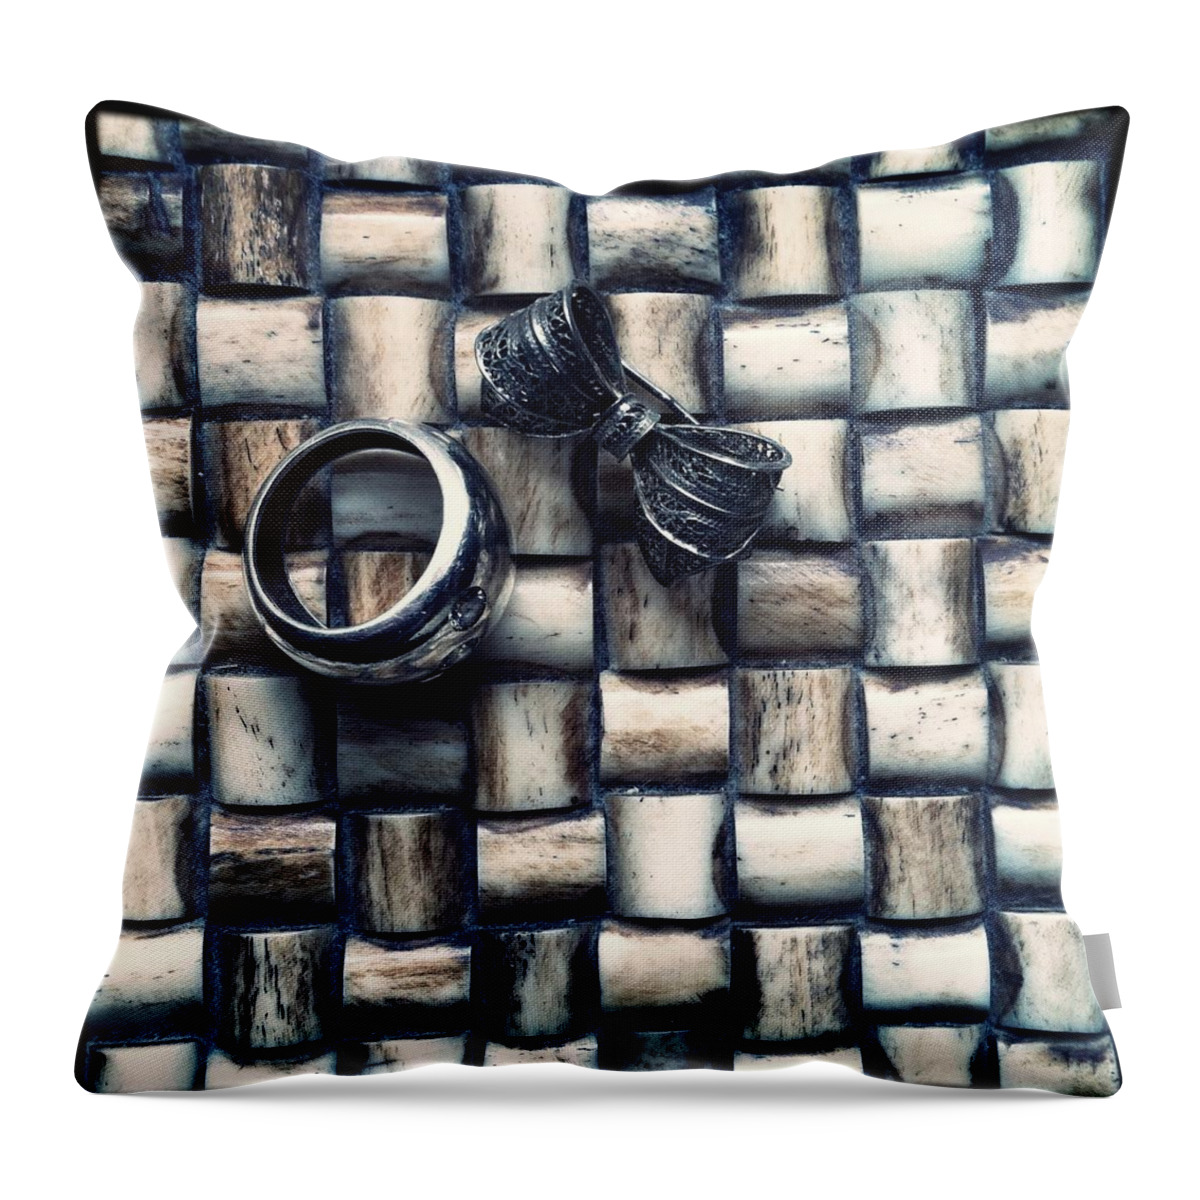 Bijouterie Throw Pillow featuring the photograph Bijouteries by Marco Oliveira